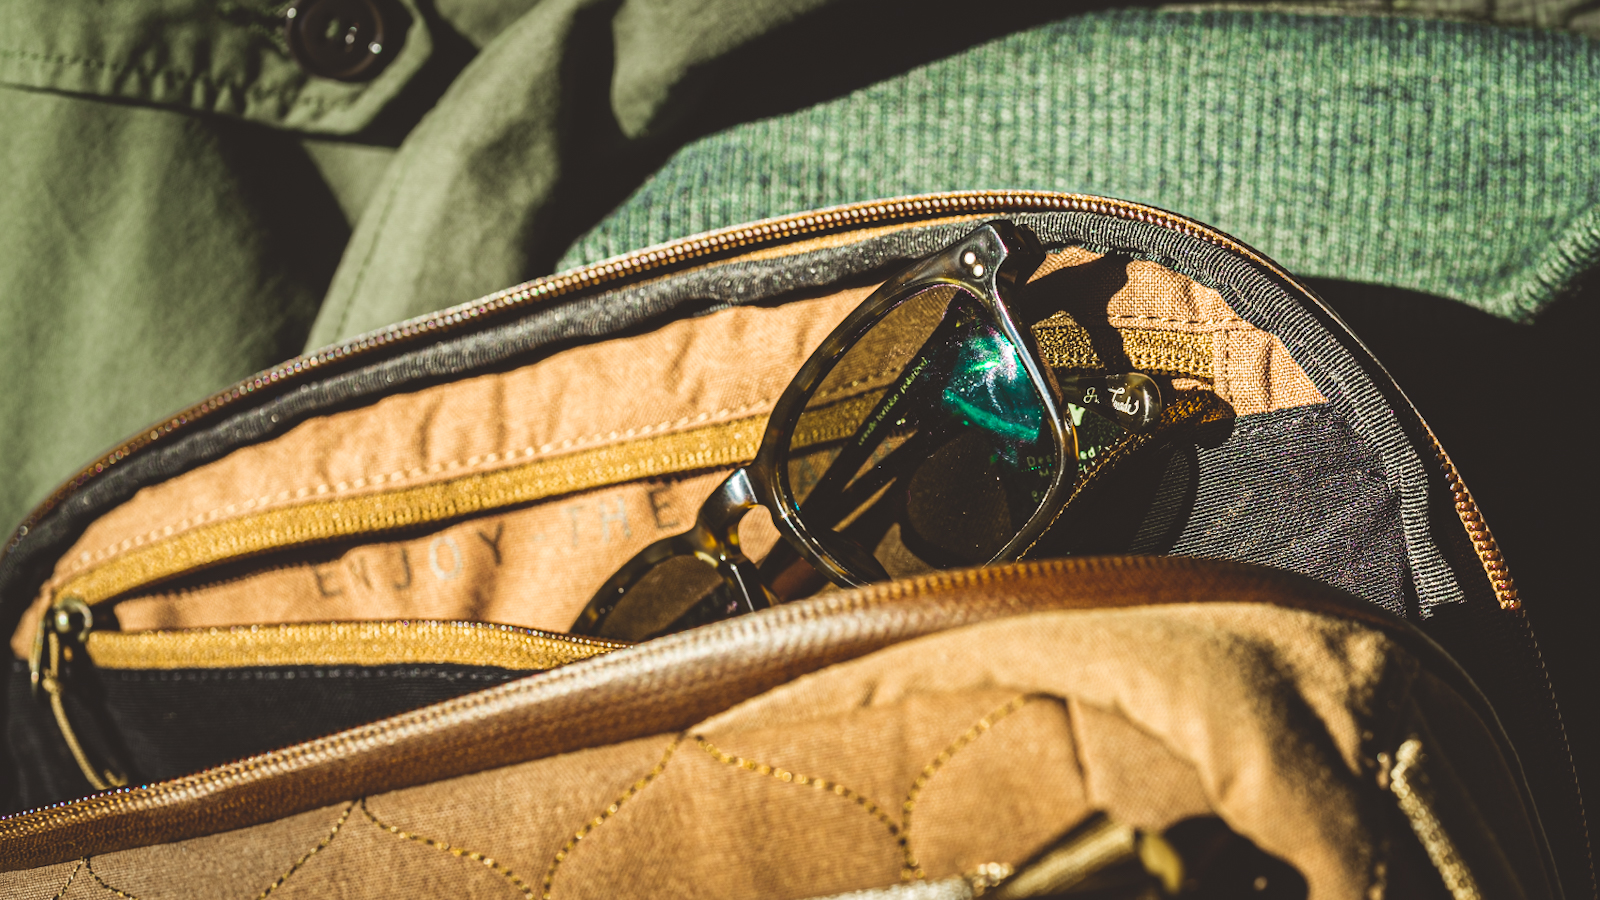 First Look | Clever Supply Release Their First Bag &#8211; The Camera Sling